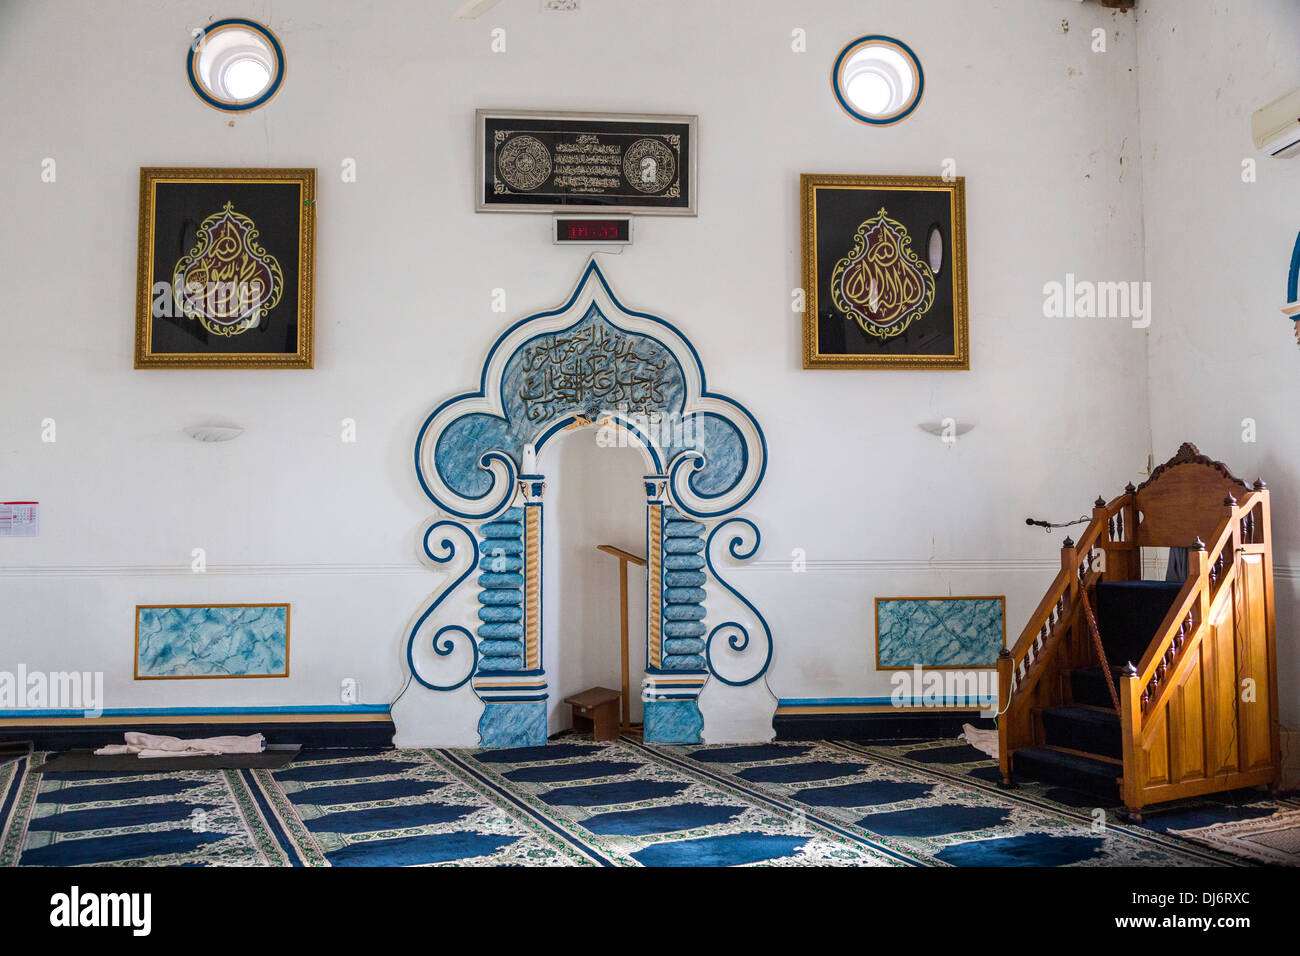 South Africa. Cape Town, Bo-kaap. Qibla of the Nurul Huda Mosque. Minbar on the right, from which the Friday sermon is given. Stock Photo